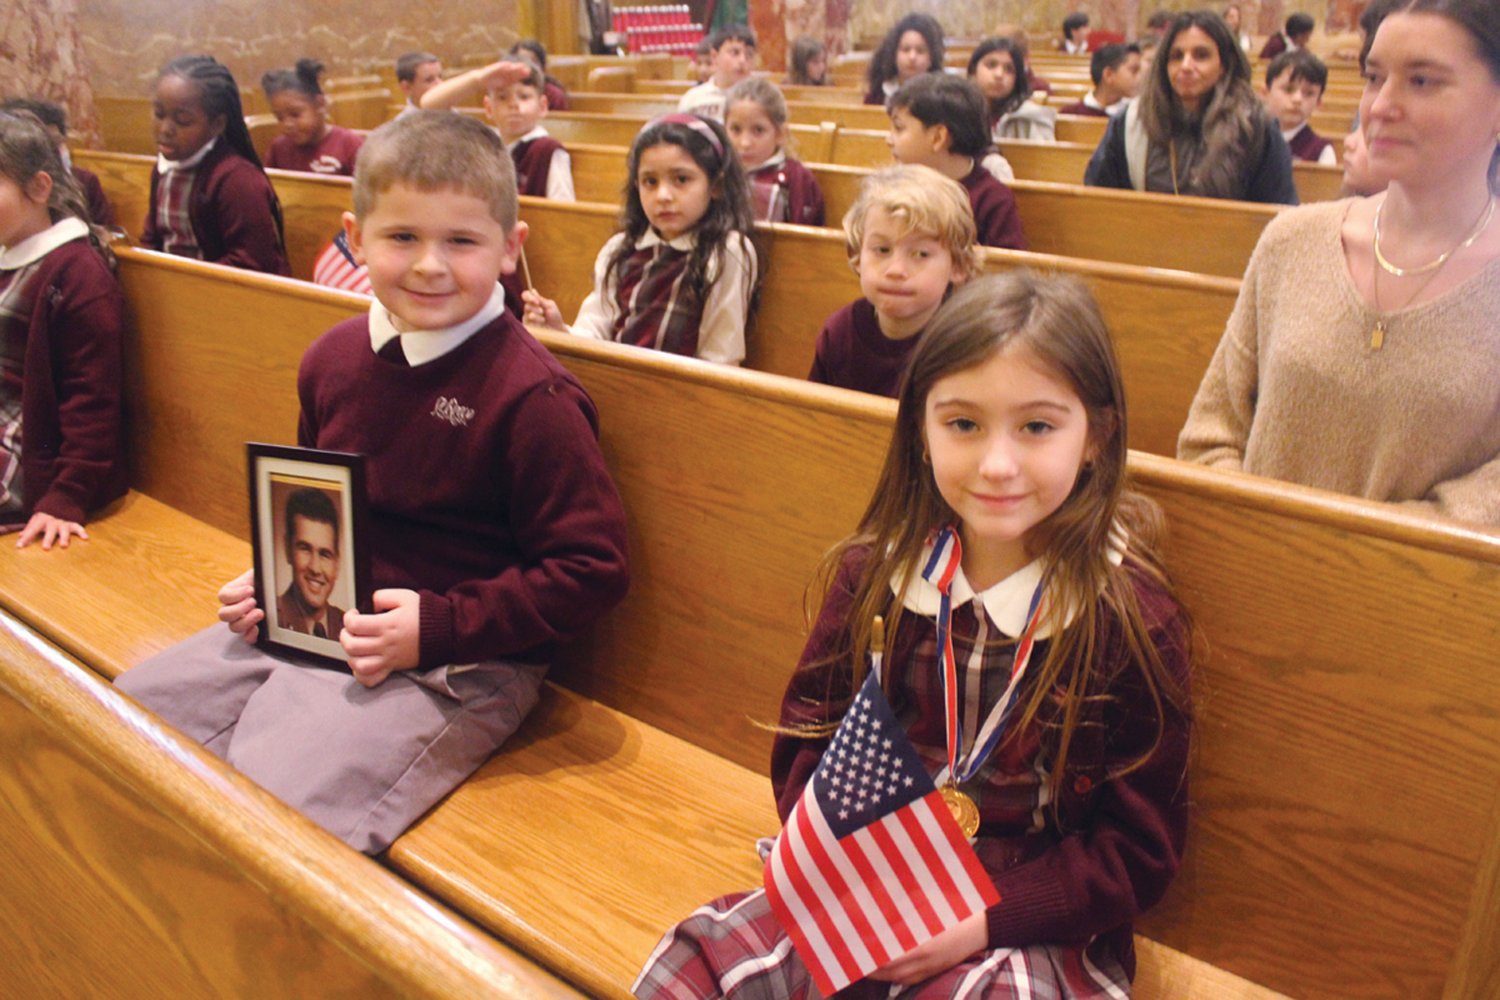 PRAYERS FOR OUR PROTECTORS: First grade students Mila Paolucci and Nicholas Innocenti attended St. Rocco School’s Veterans Day Prayer Service on Wednesday, Nov. 9. Innocenti held a photo of his great-grandfather, a veteran.